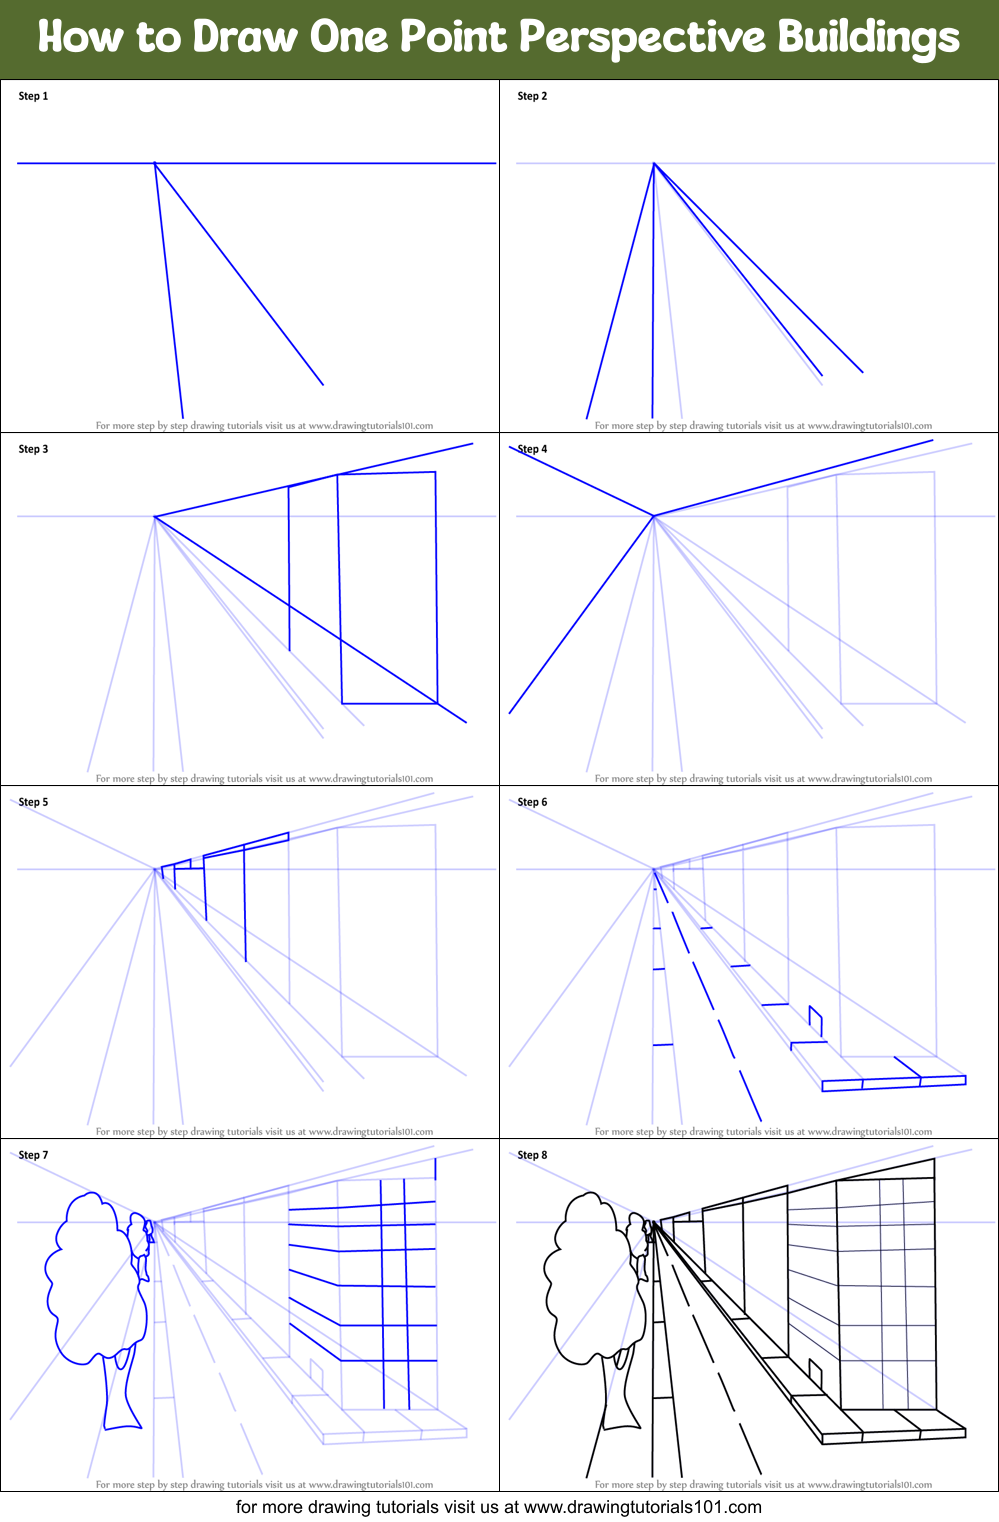 How to Draw One Point Perspective Buildings printable step by step